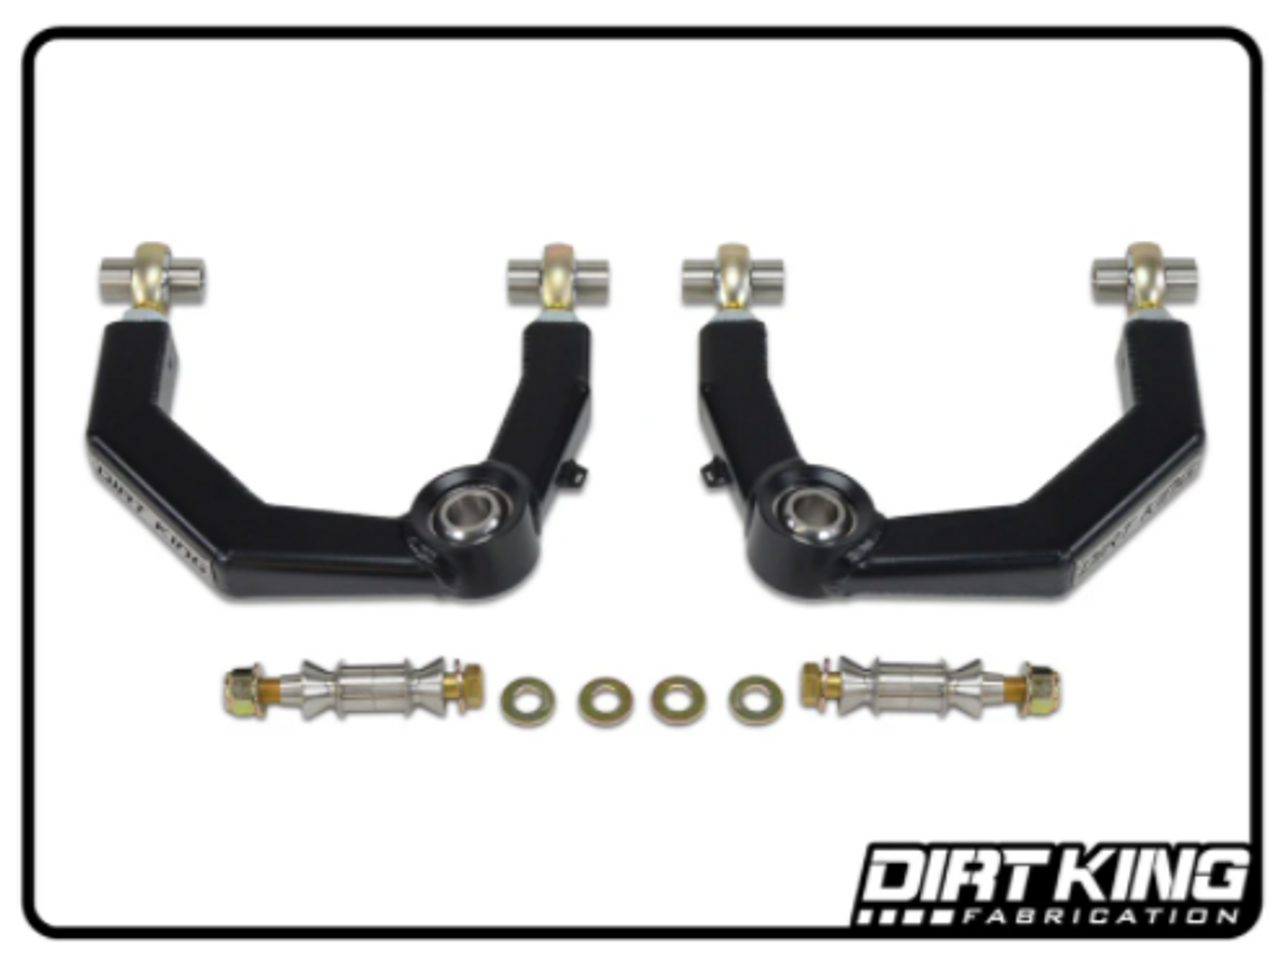 Dirt King Fabrication DK-811903 Heim Upper Control Arms for Toyota Tacoma 2005-2023